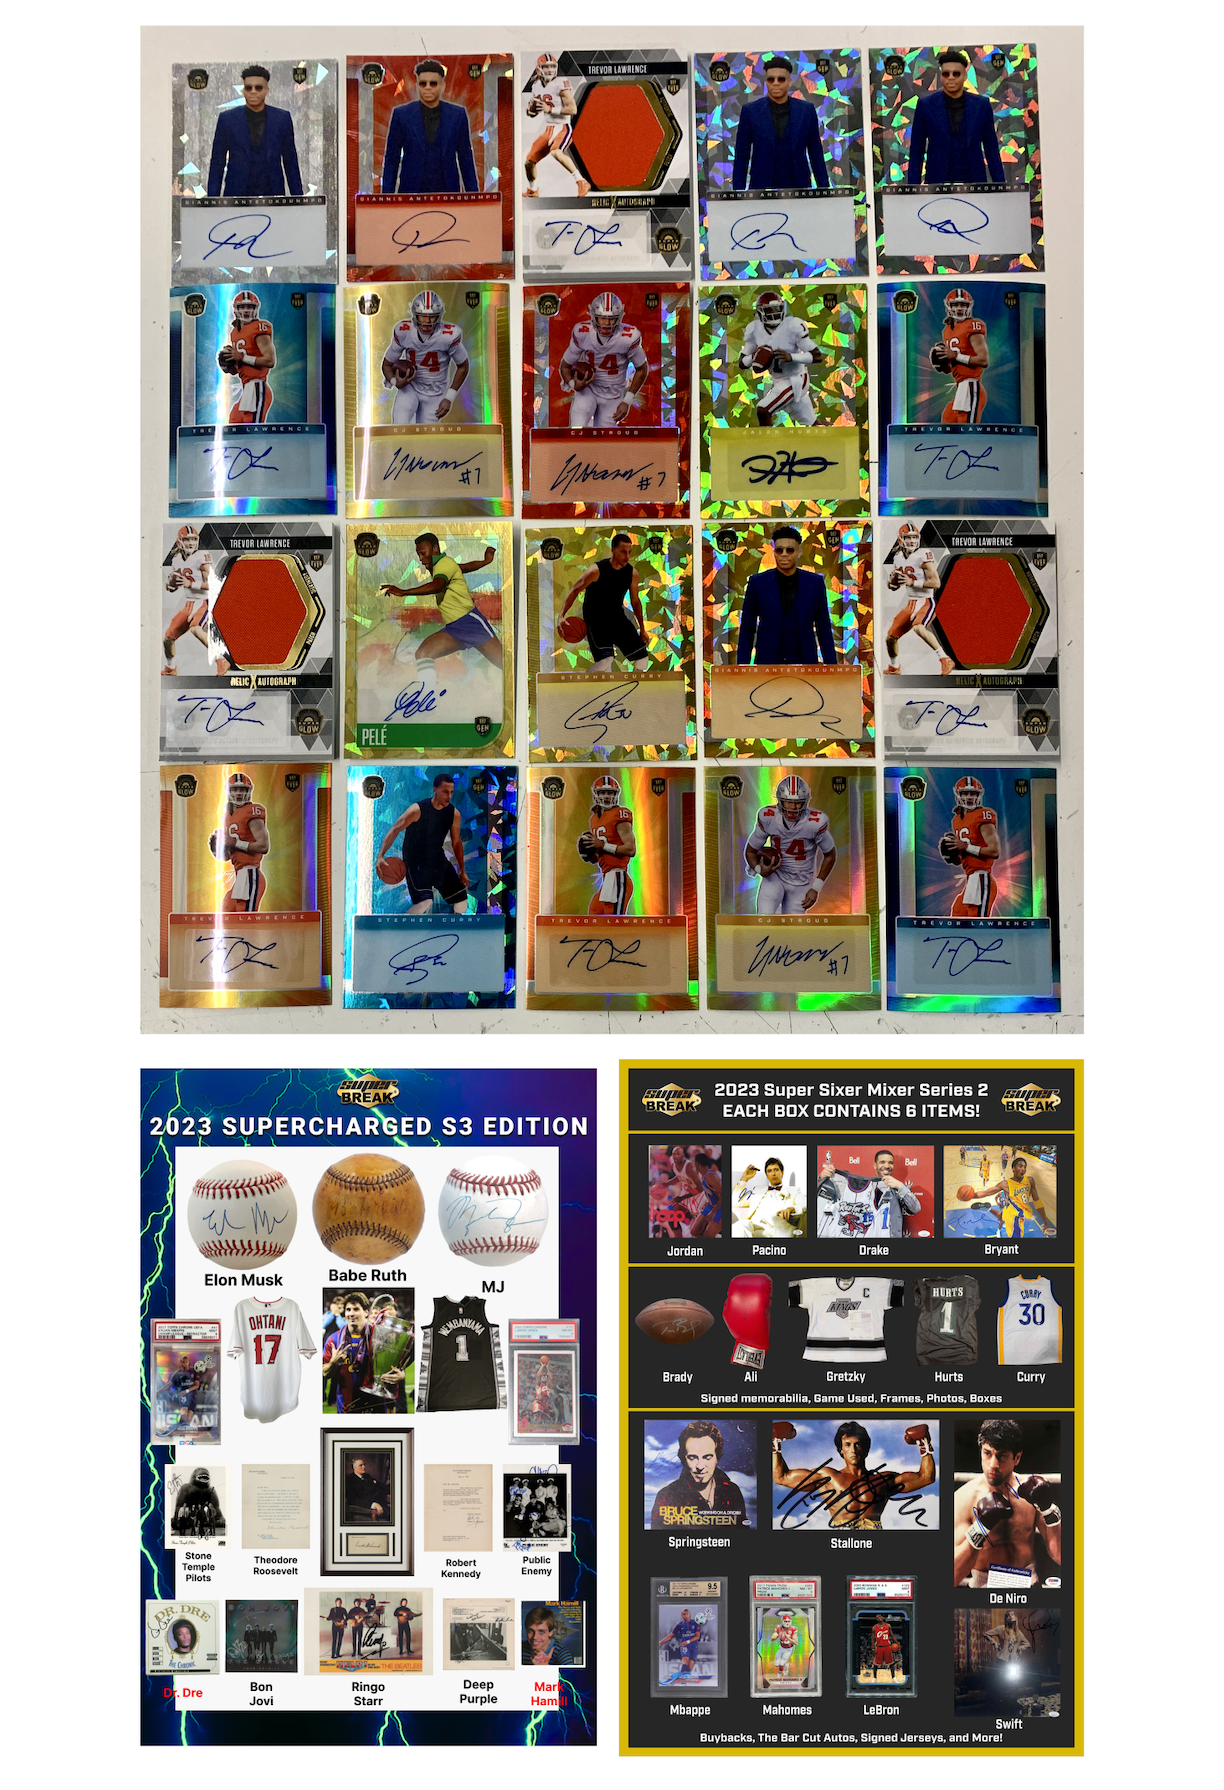 SOLD OUT - BLACK FRIDAY SPECIAL #5 - STROUD, CURRY, PELE, GIANNIS, T LAW, OR HURTS AUTO + SUPERCHARGED 5 BOX CASE + SIXER MIXER BOX!